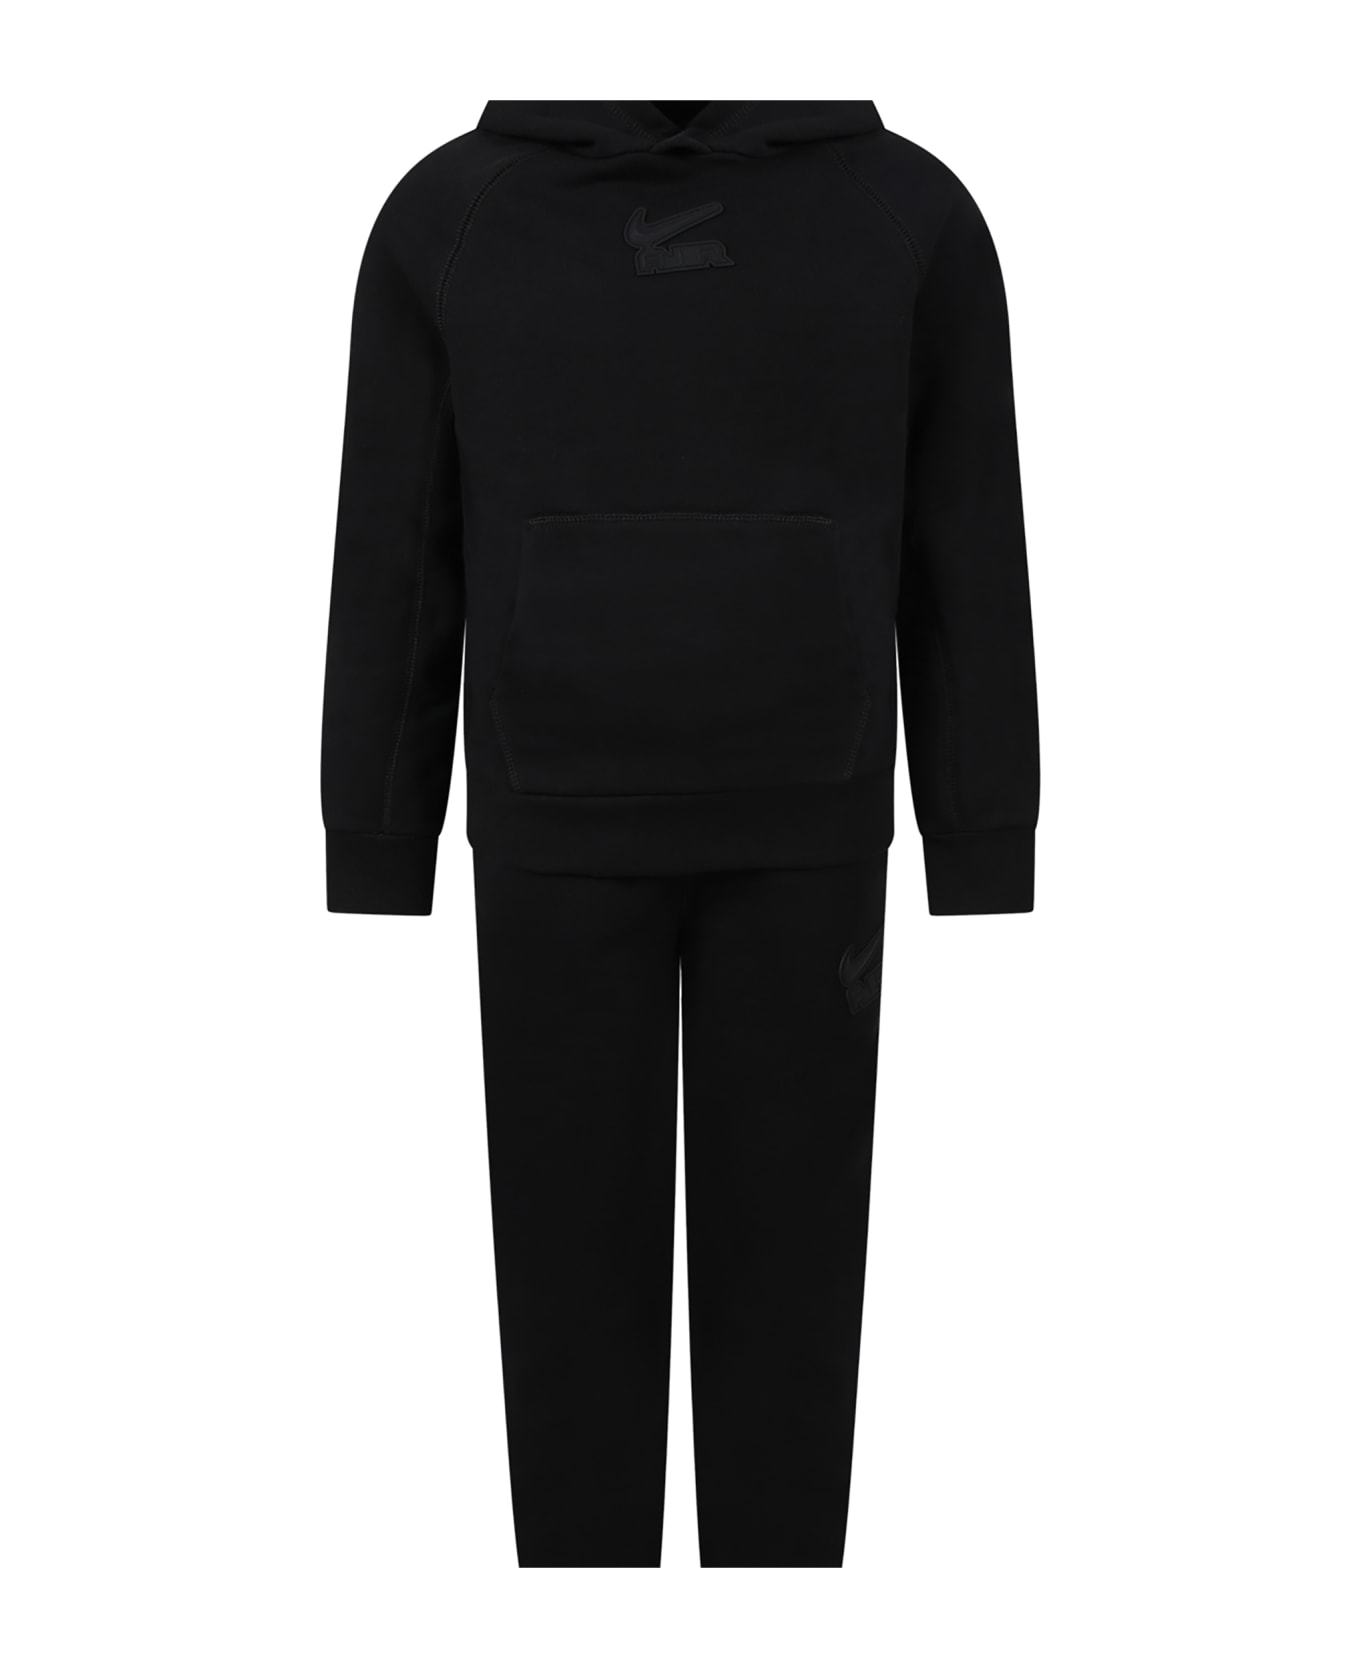 Nike Black Suit For Boy With Logo - Black ボトムス